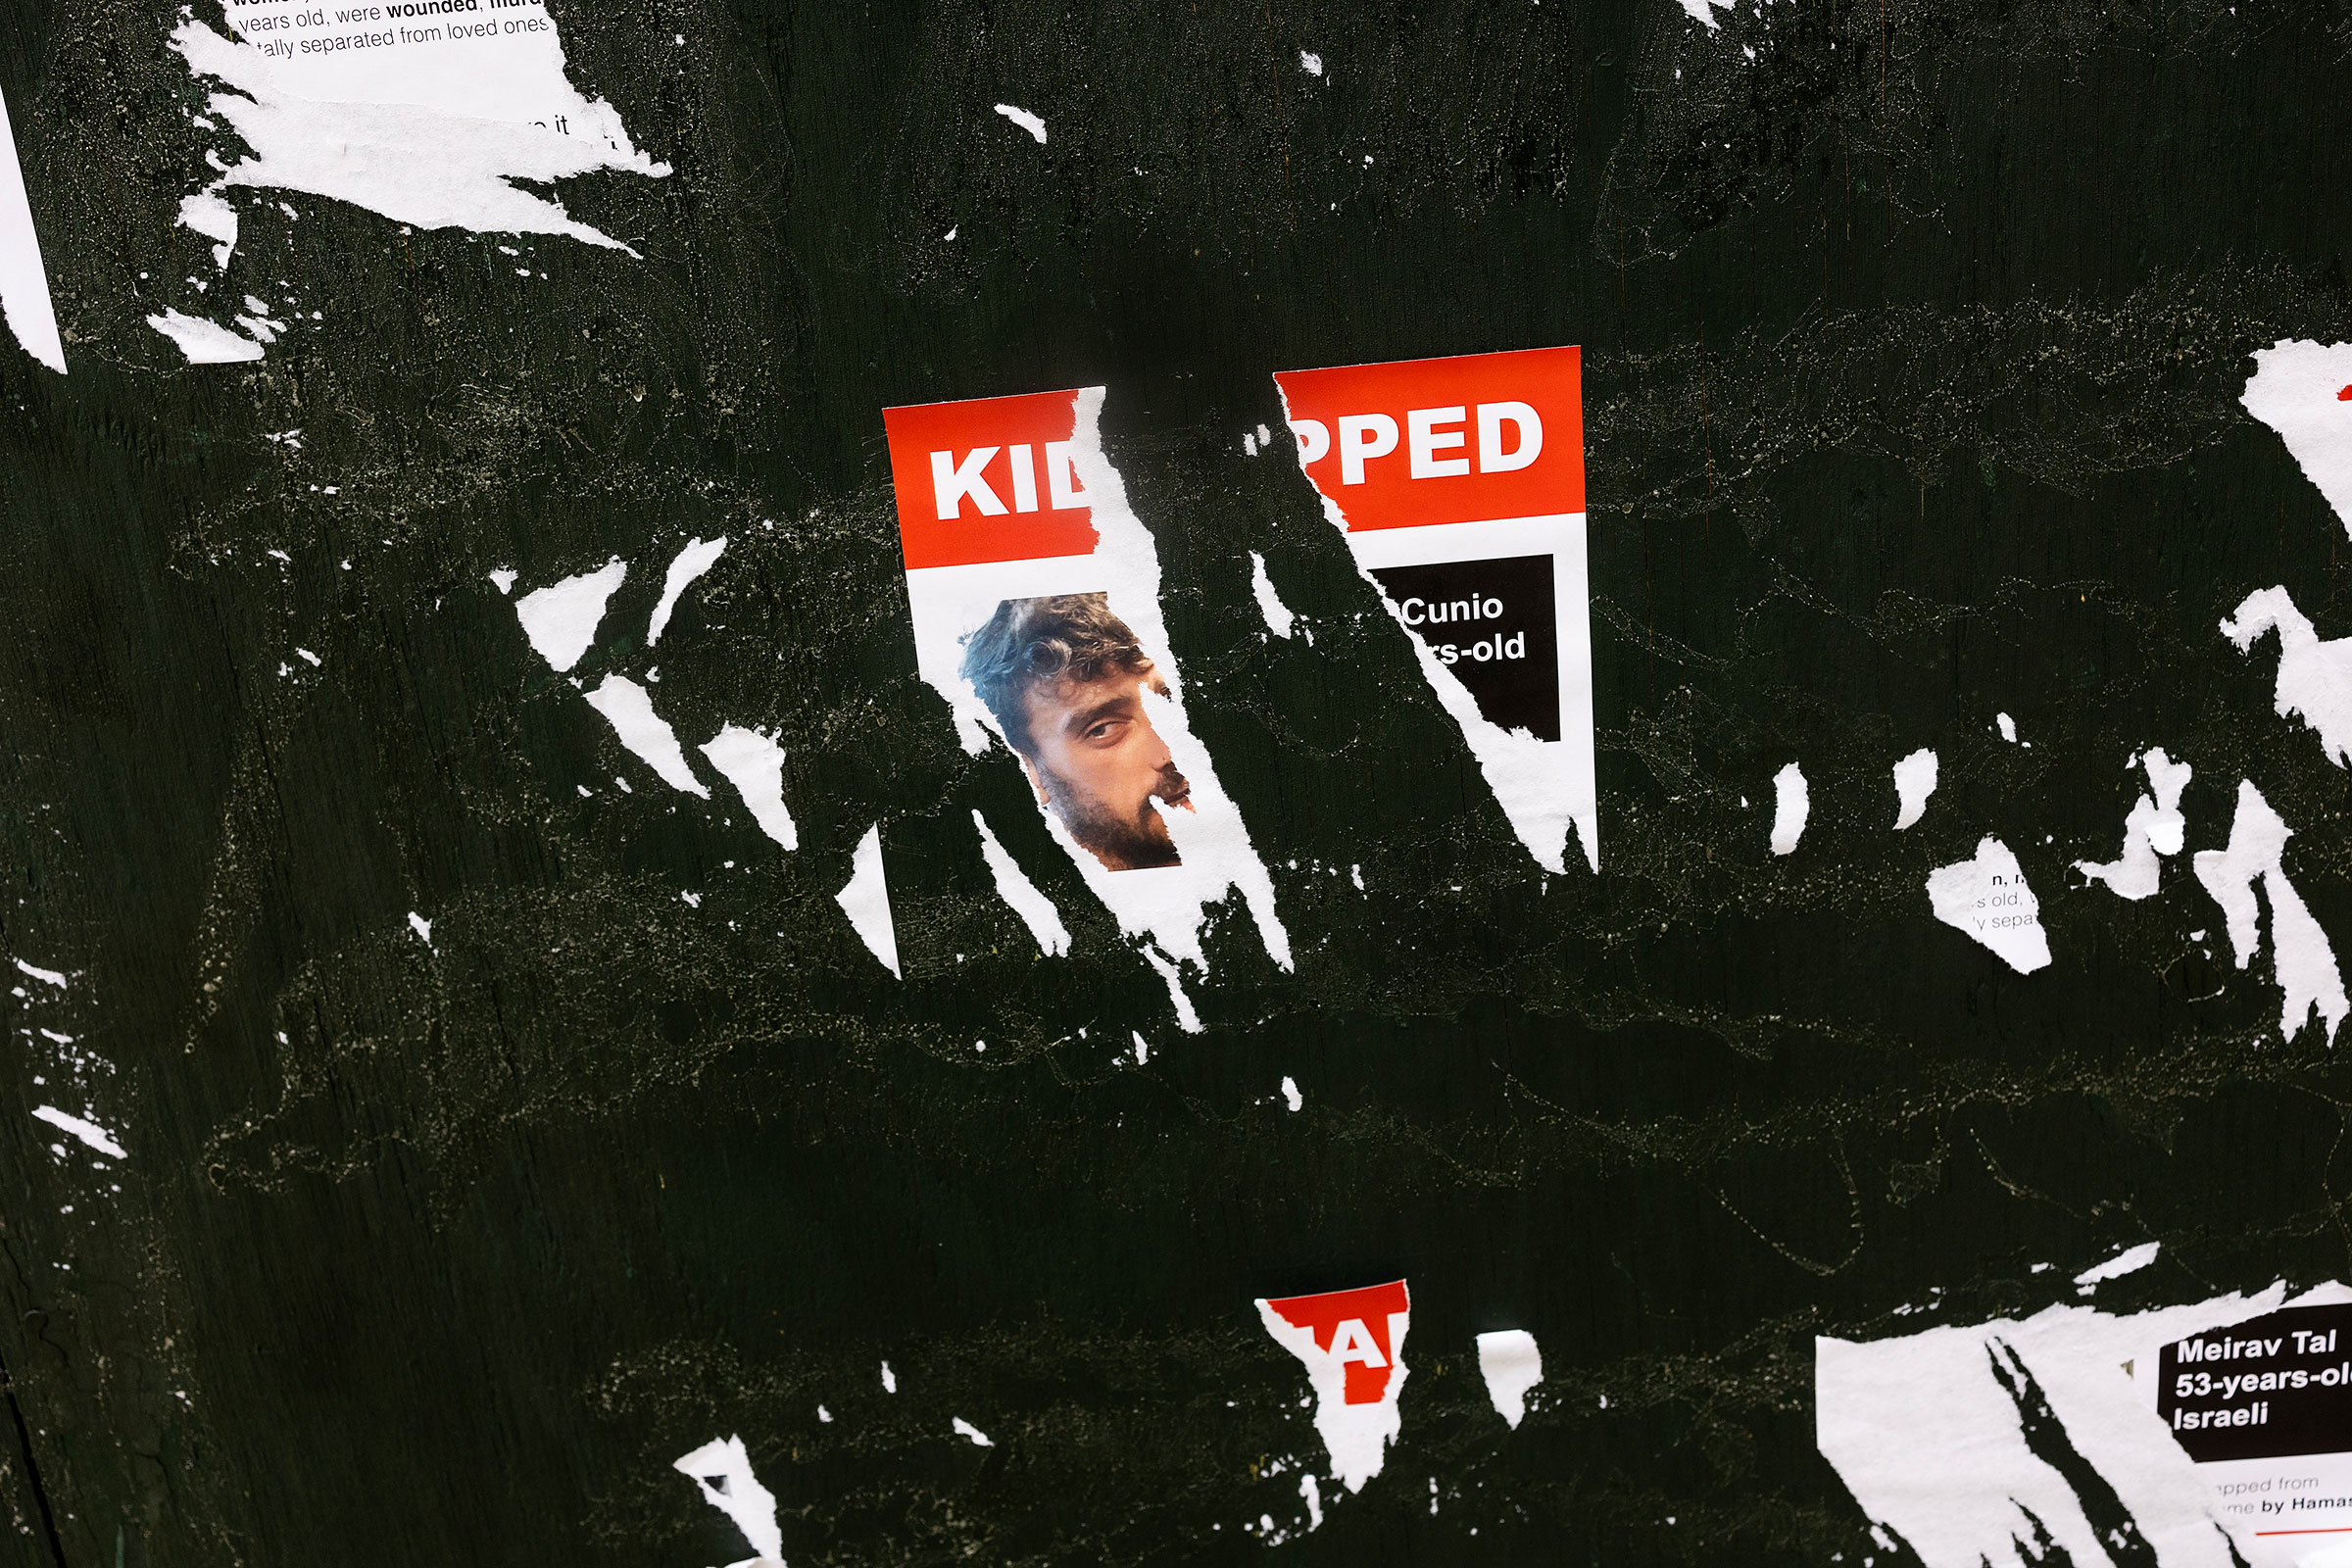 Torn kidnapped posters around the NYU campus